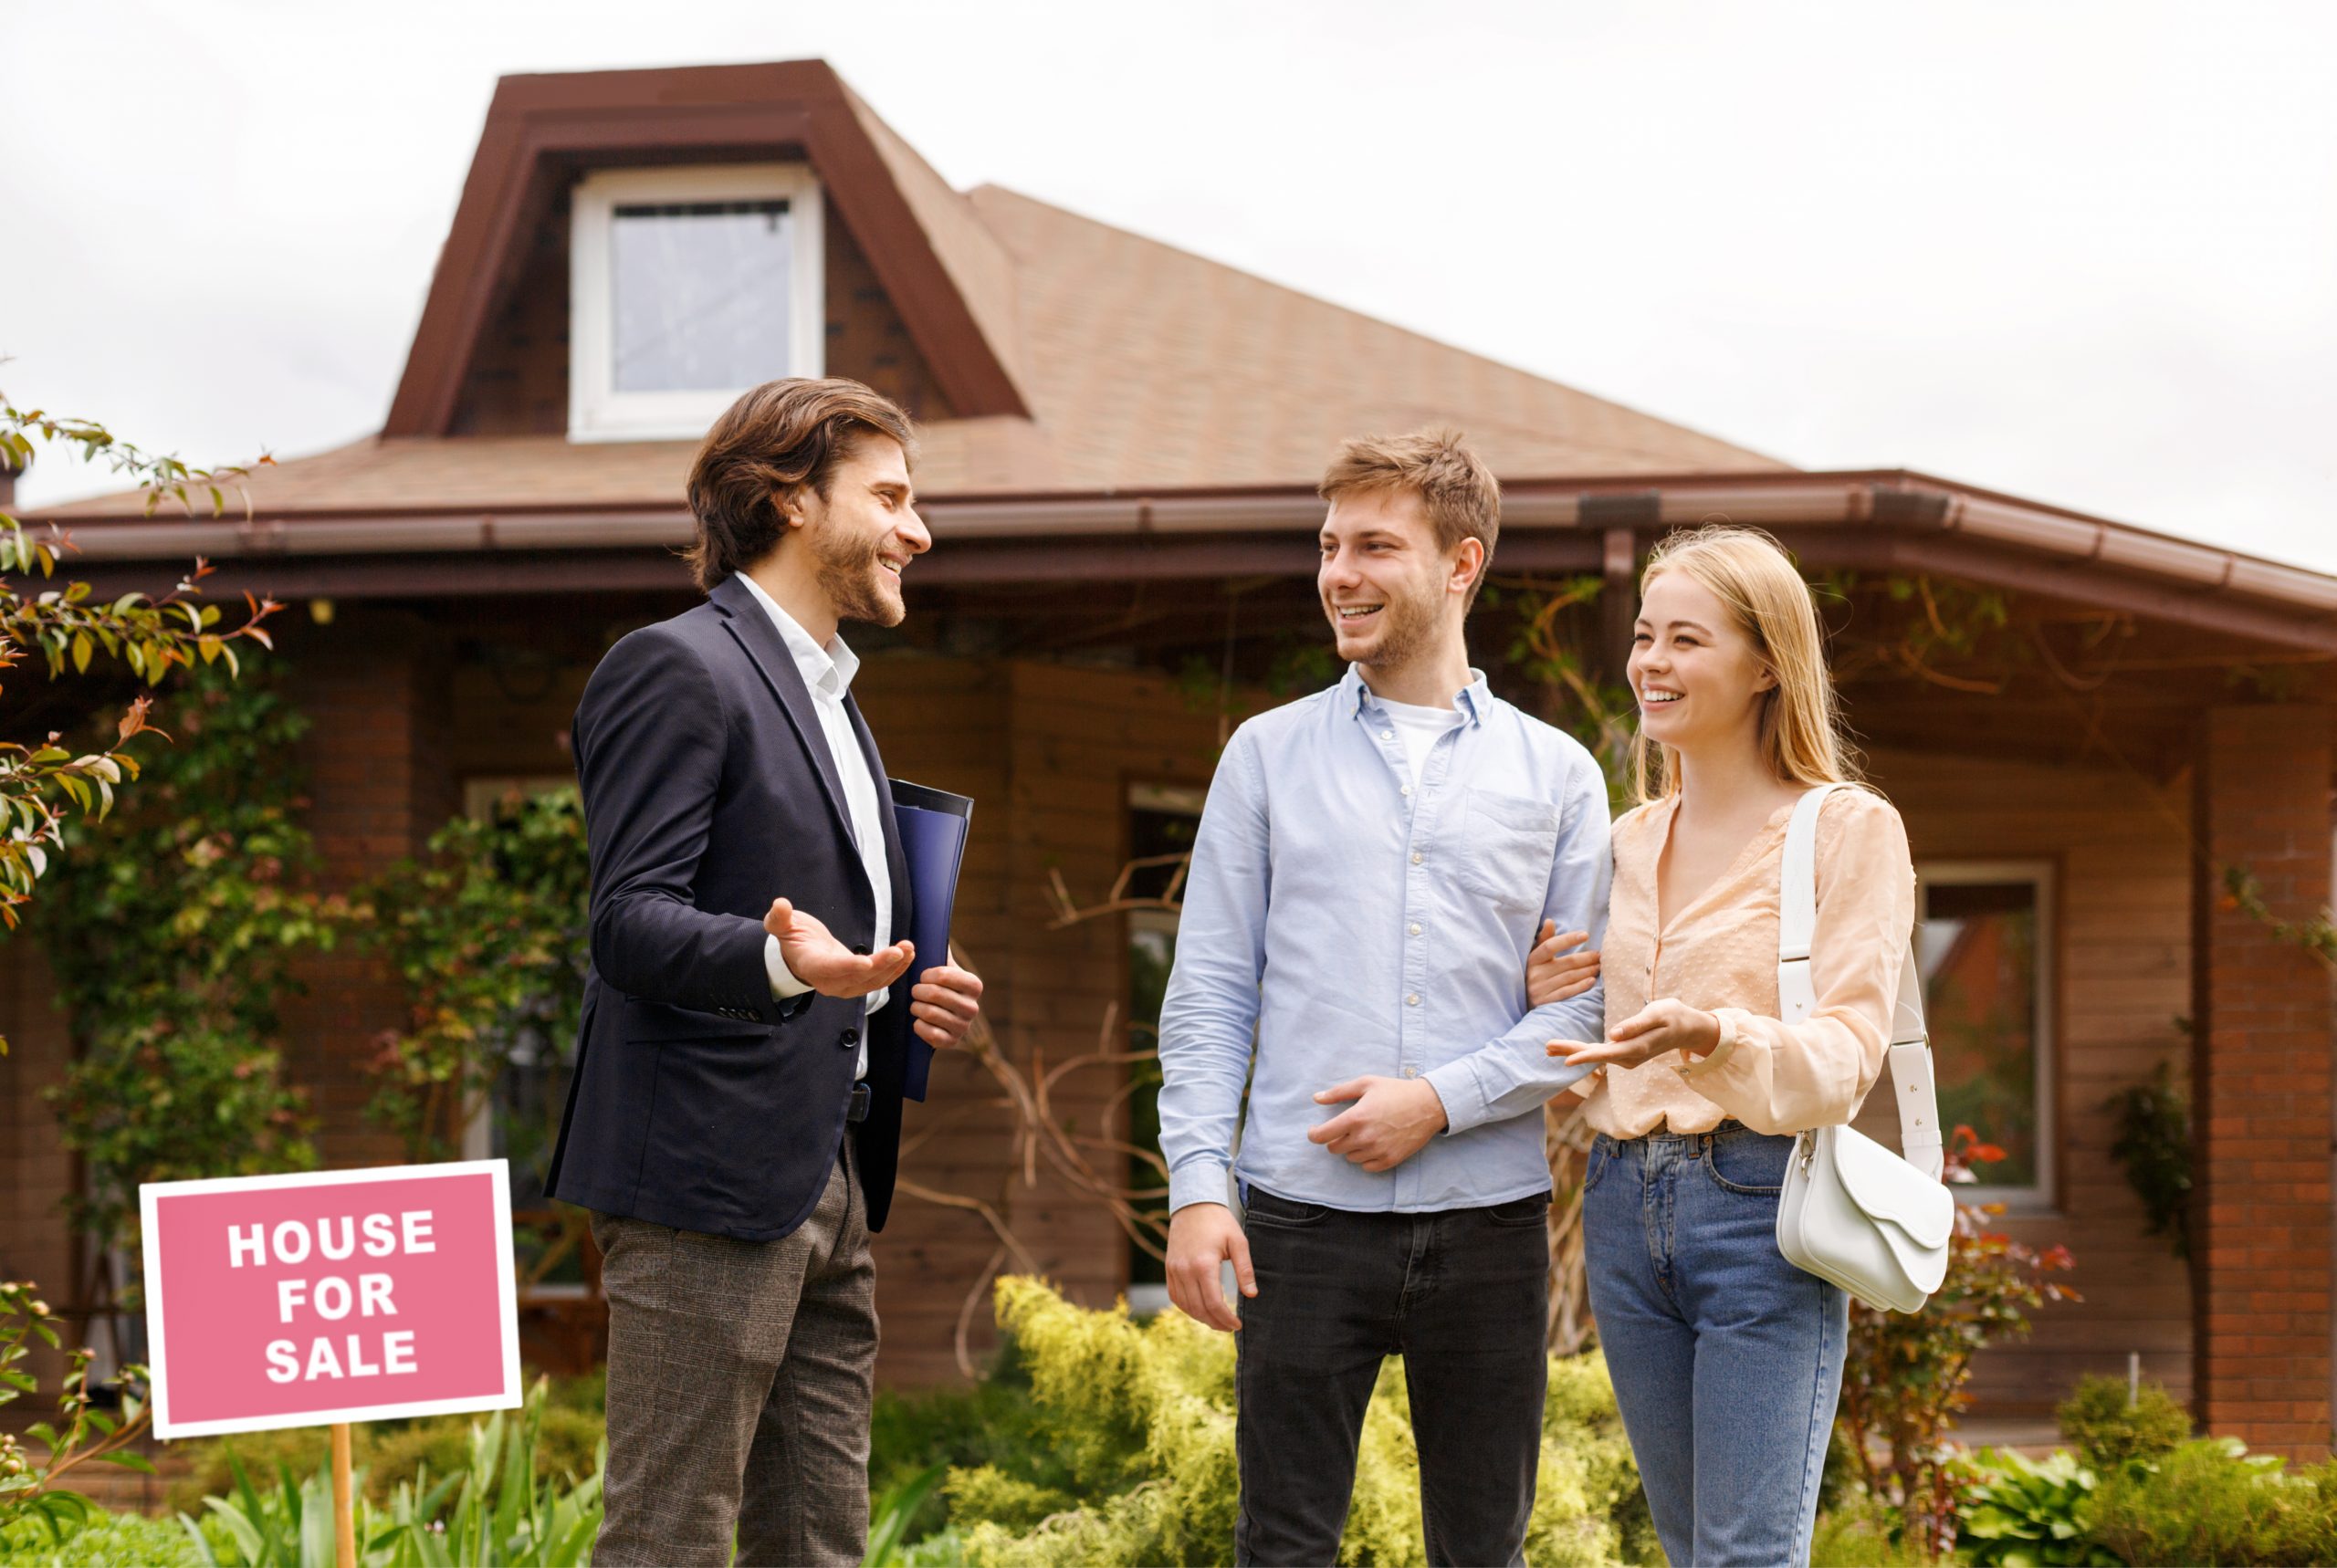 Young family talking to real estate agent about purchasing property near beautiful house outside